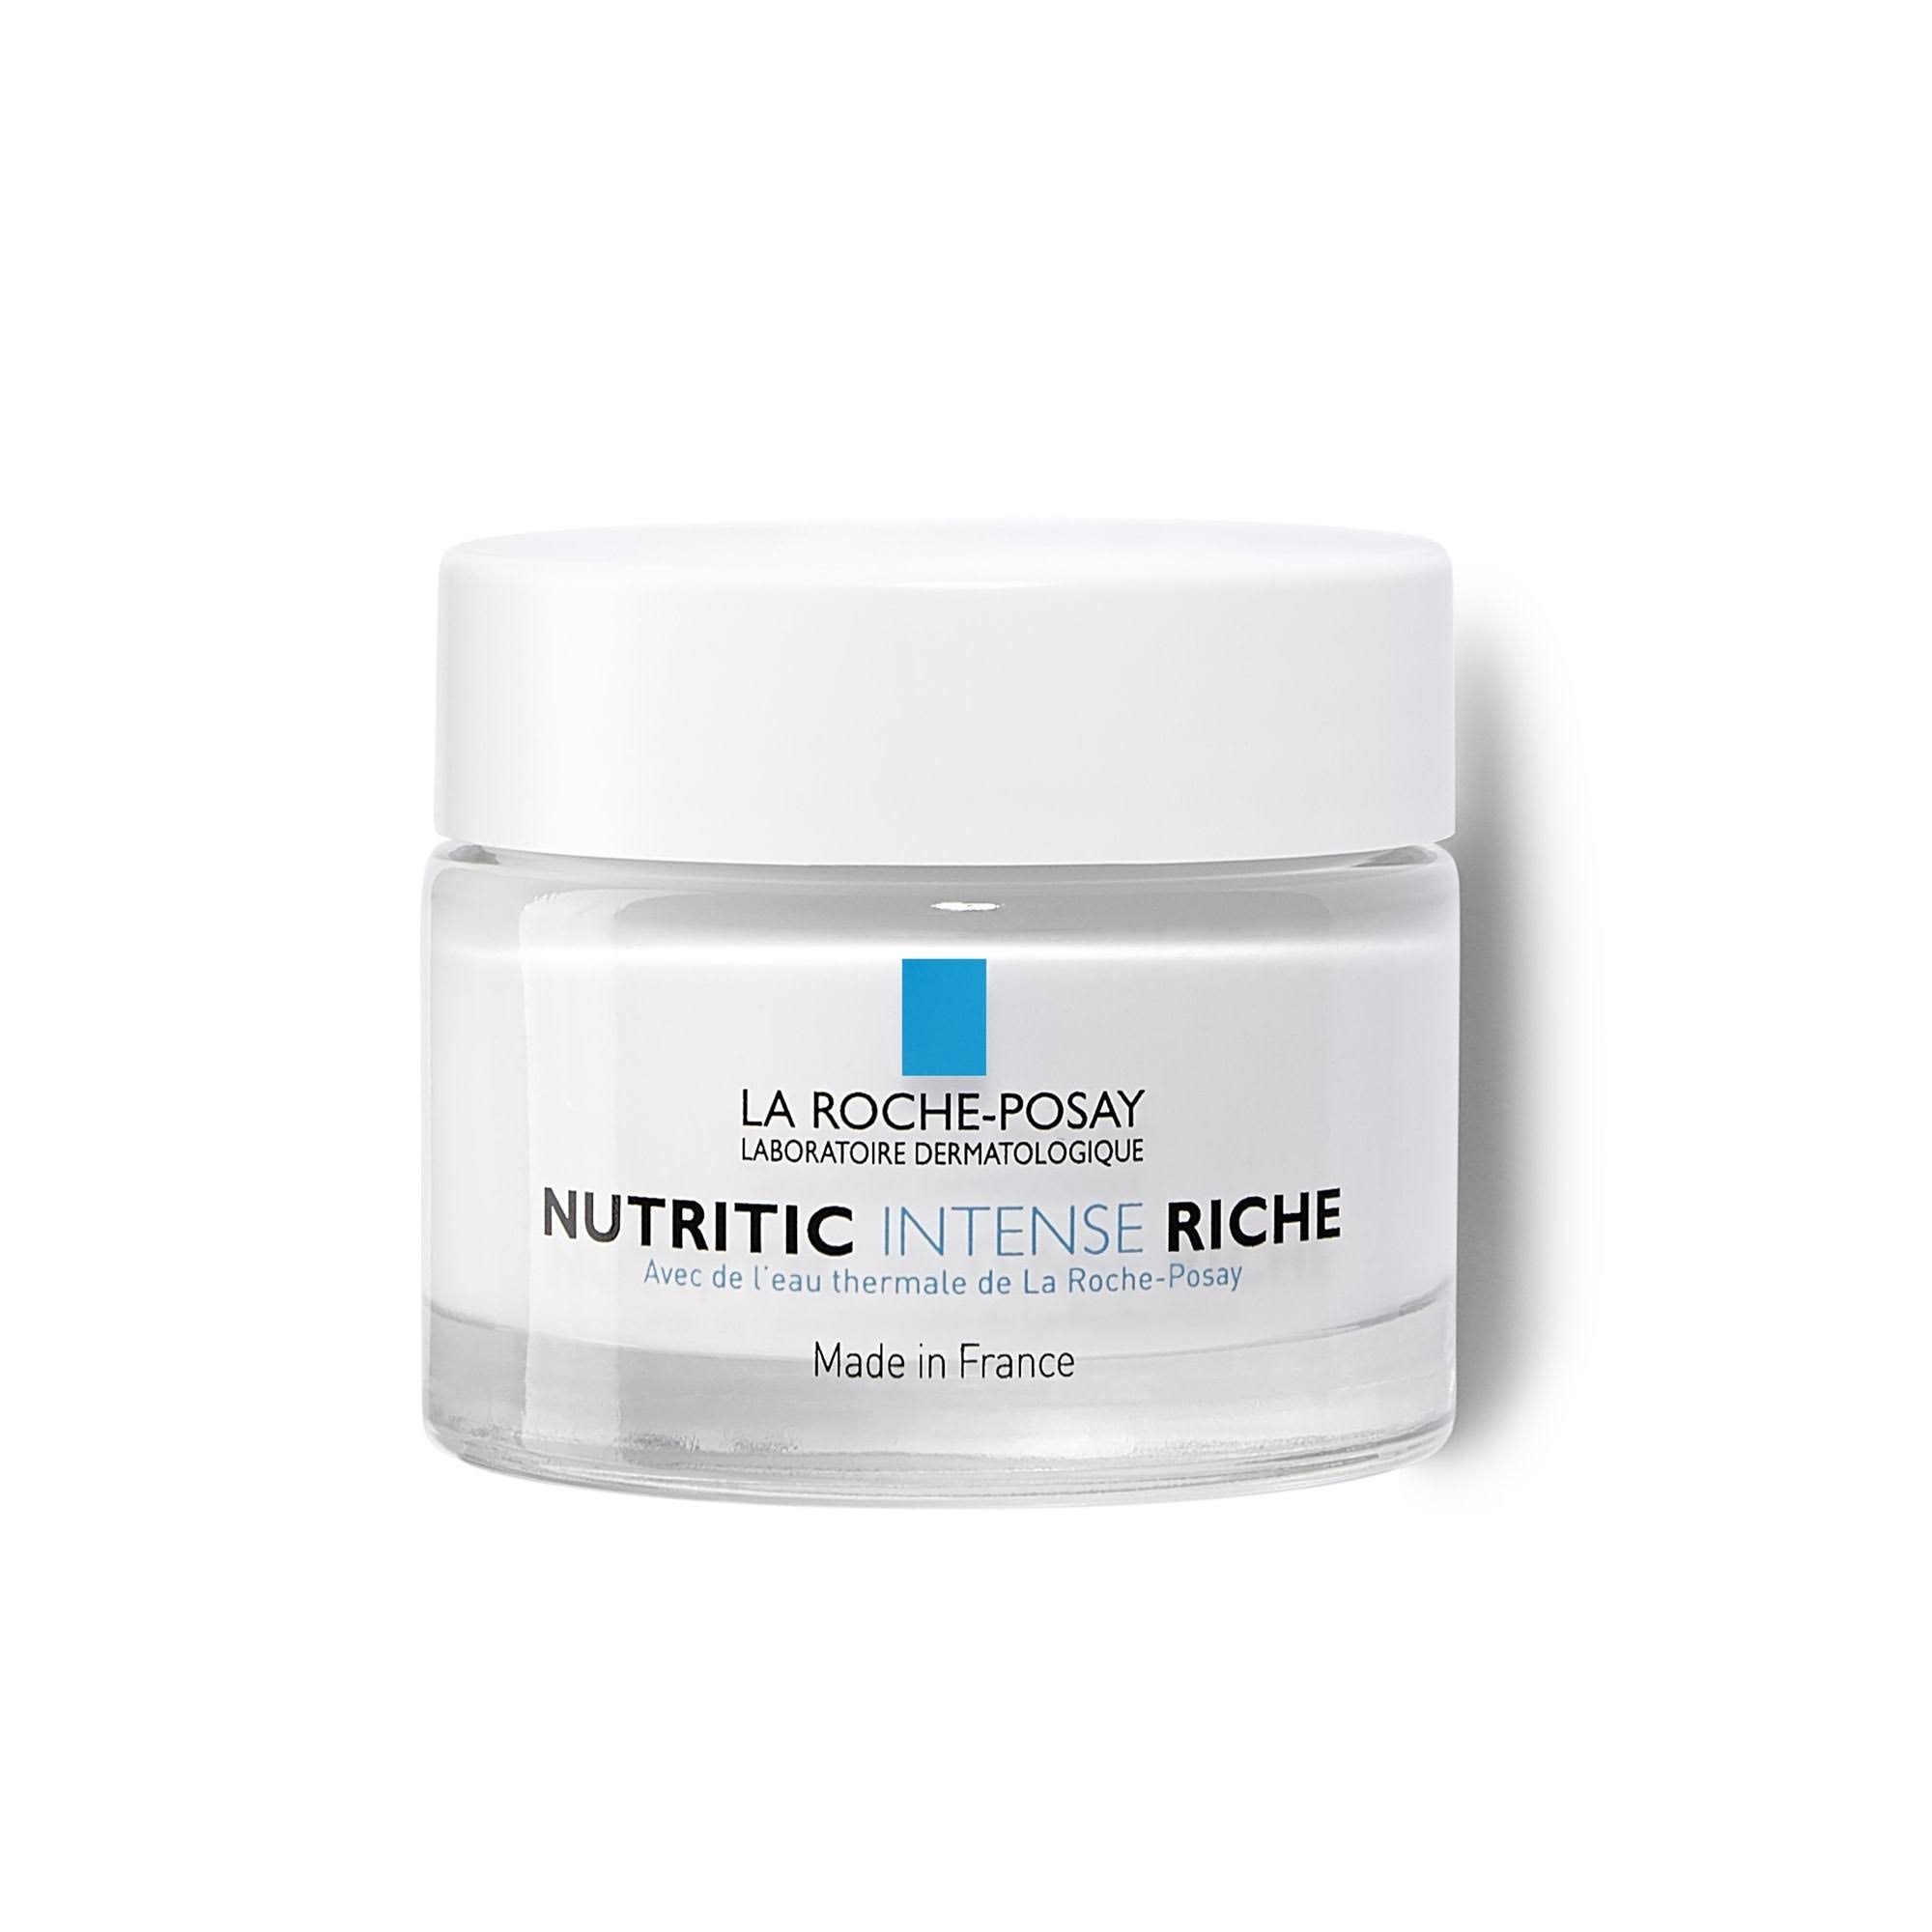 La Roche-Posay Nutritic Intense Rich In-Depth Nutri-Reconstituting Cream - with Thermal Water, 50ml